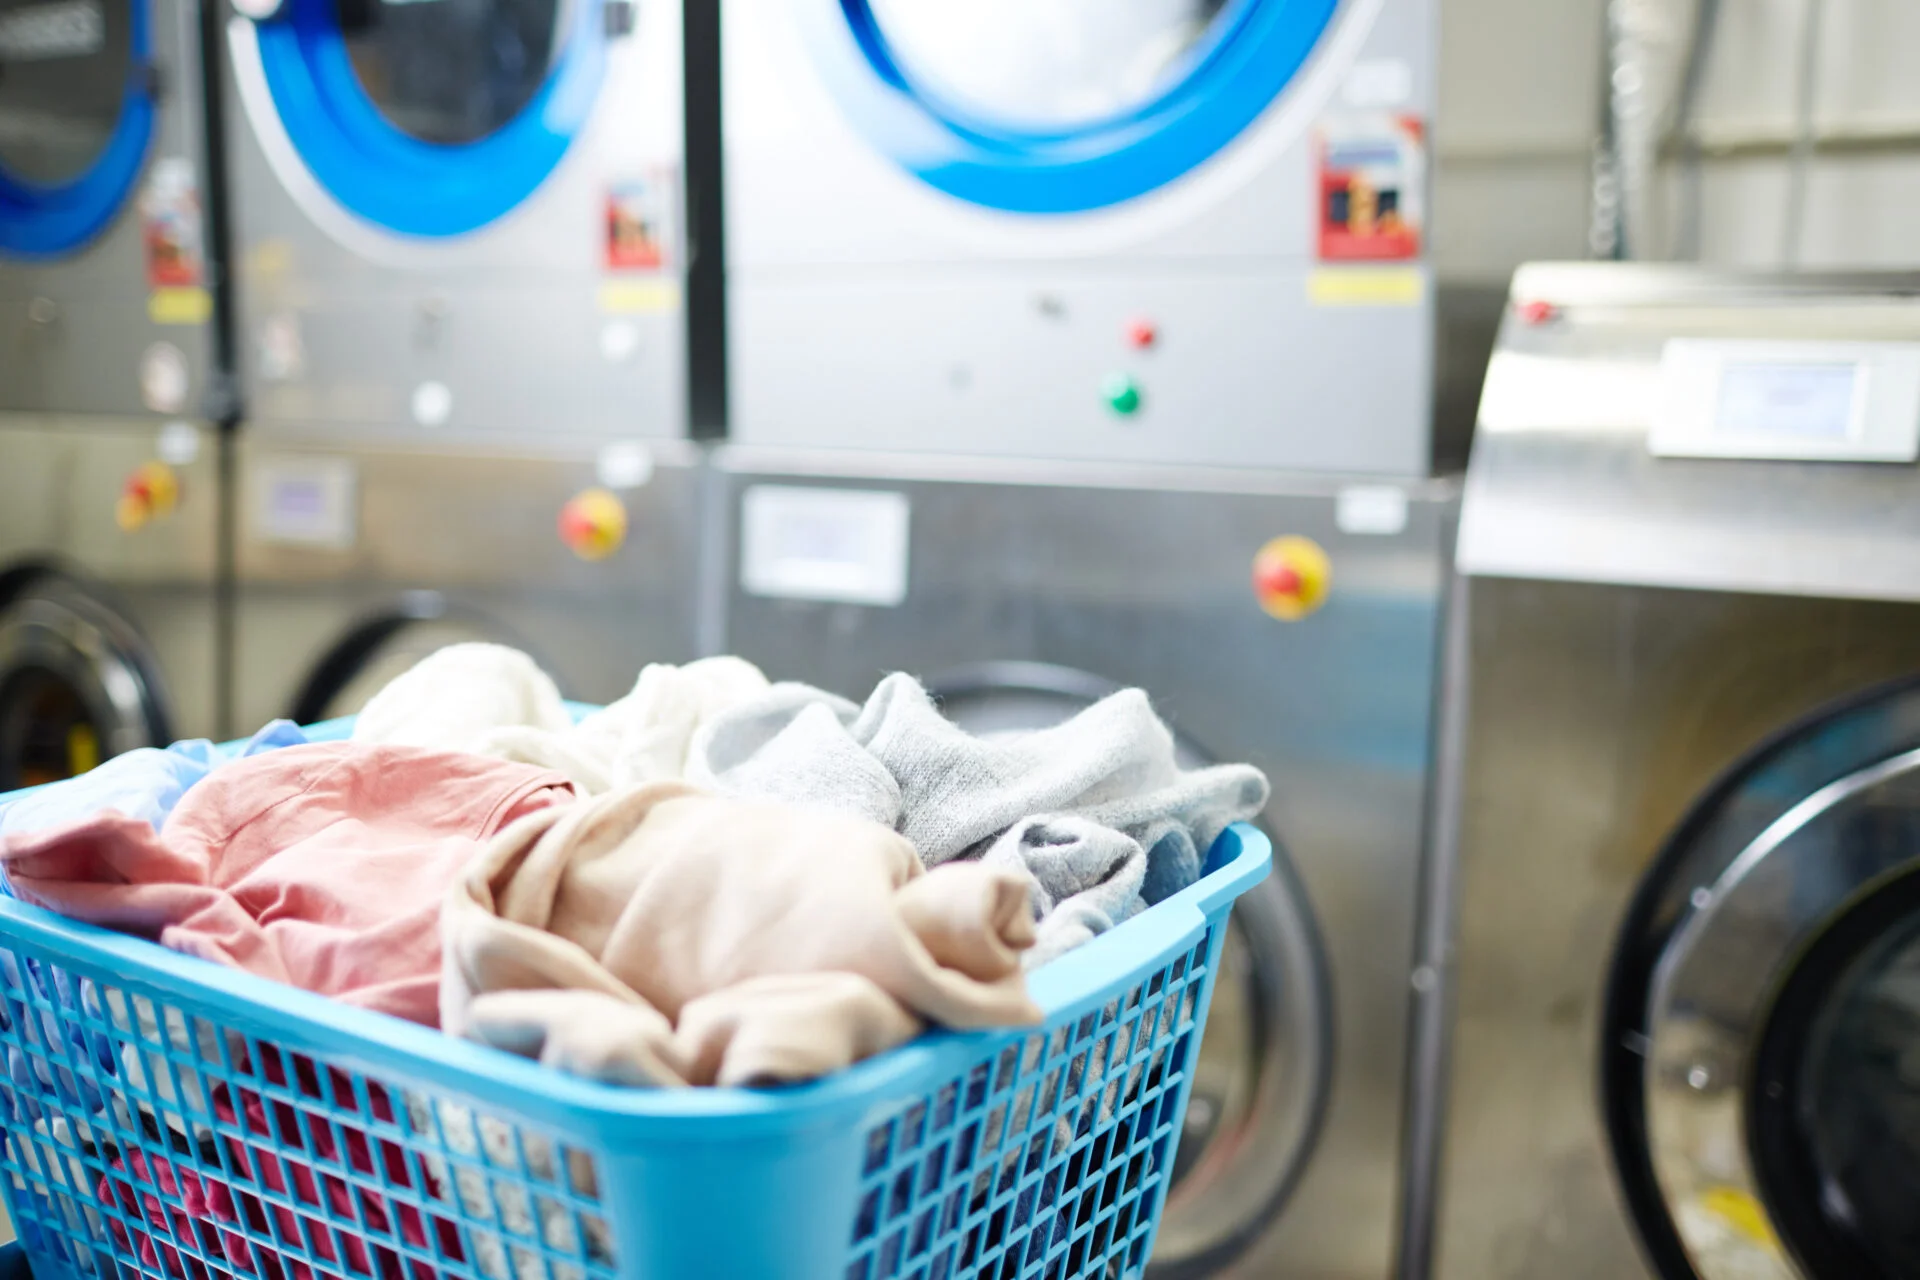 Laundry full of bacteria because it was cleaned with Laundrette laundry detergent